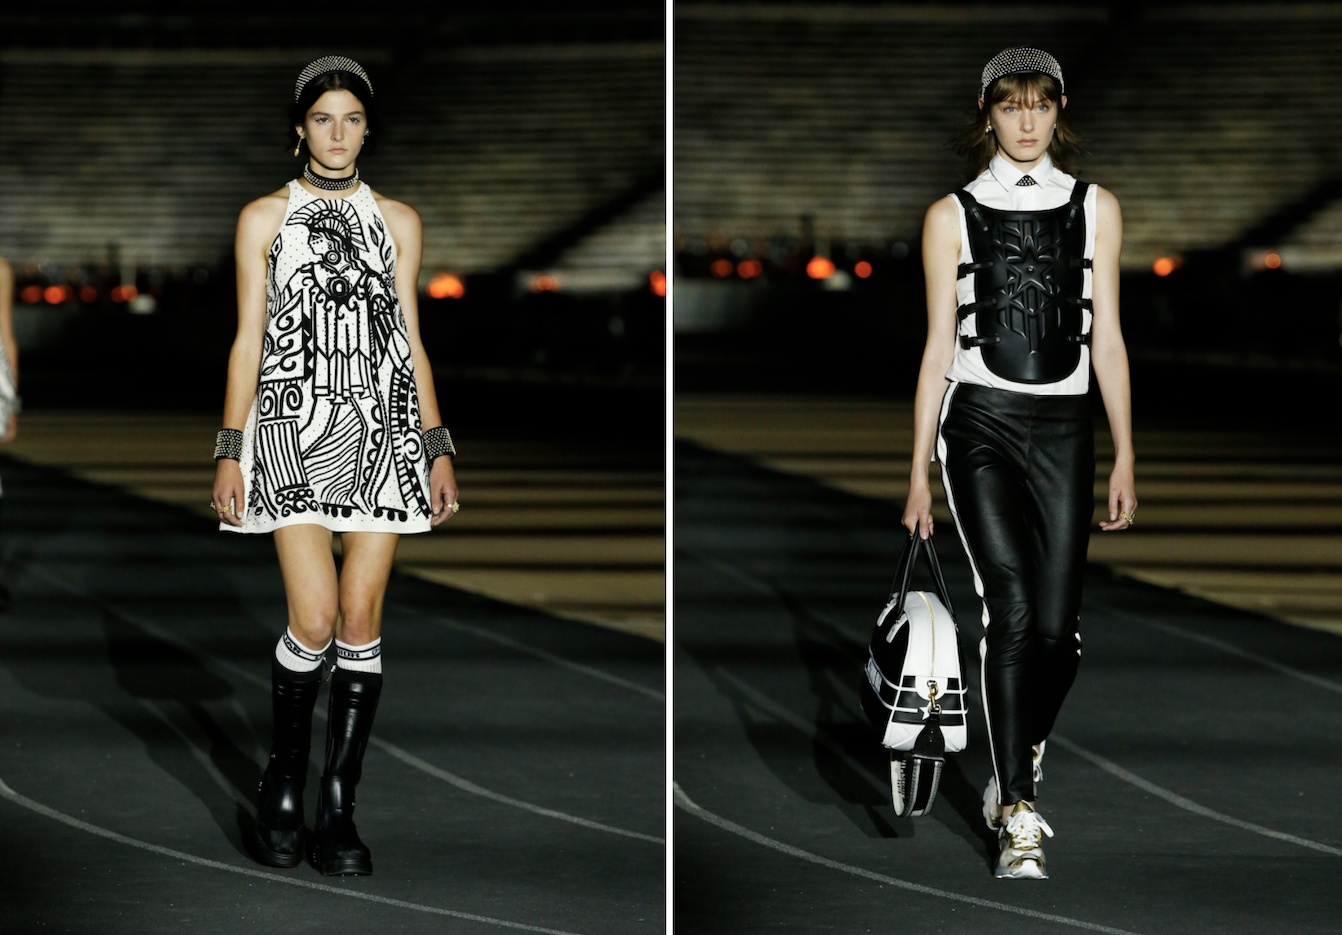  Images courtesy of Dior.